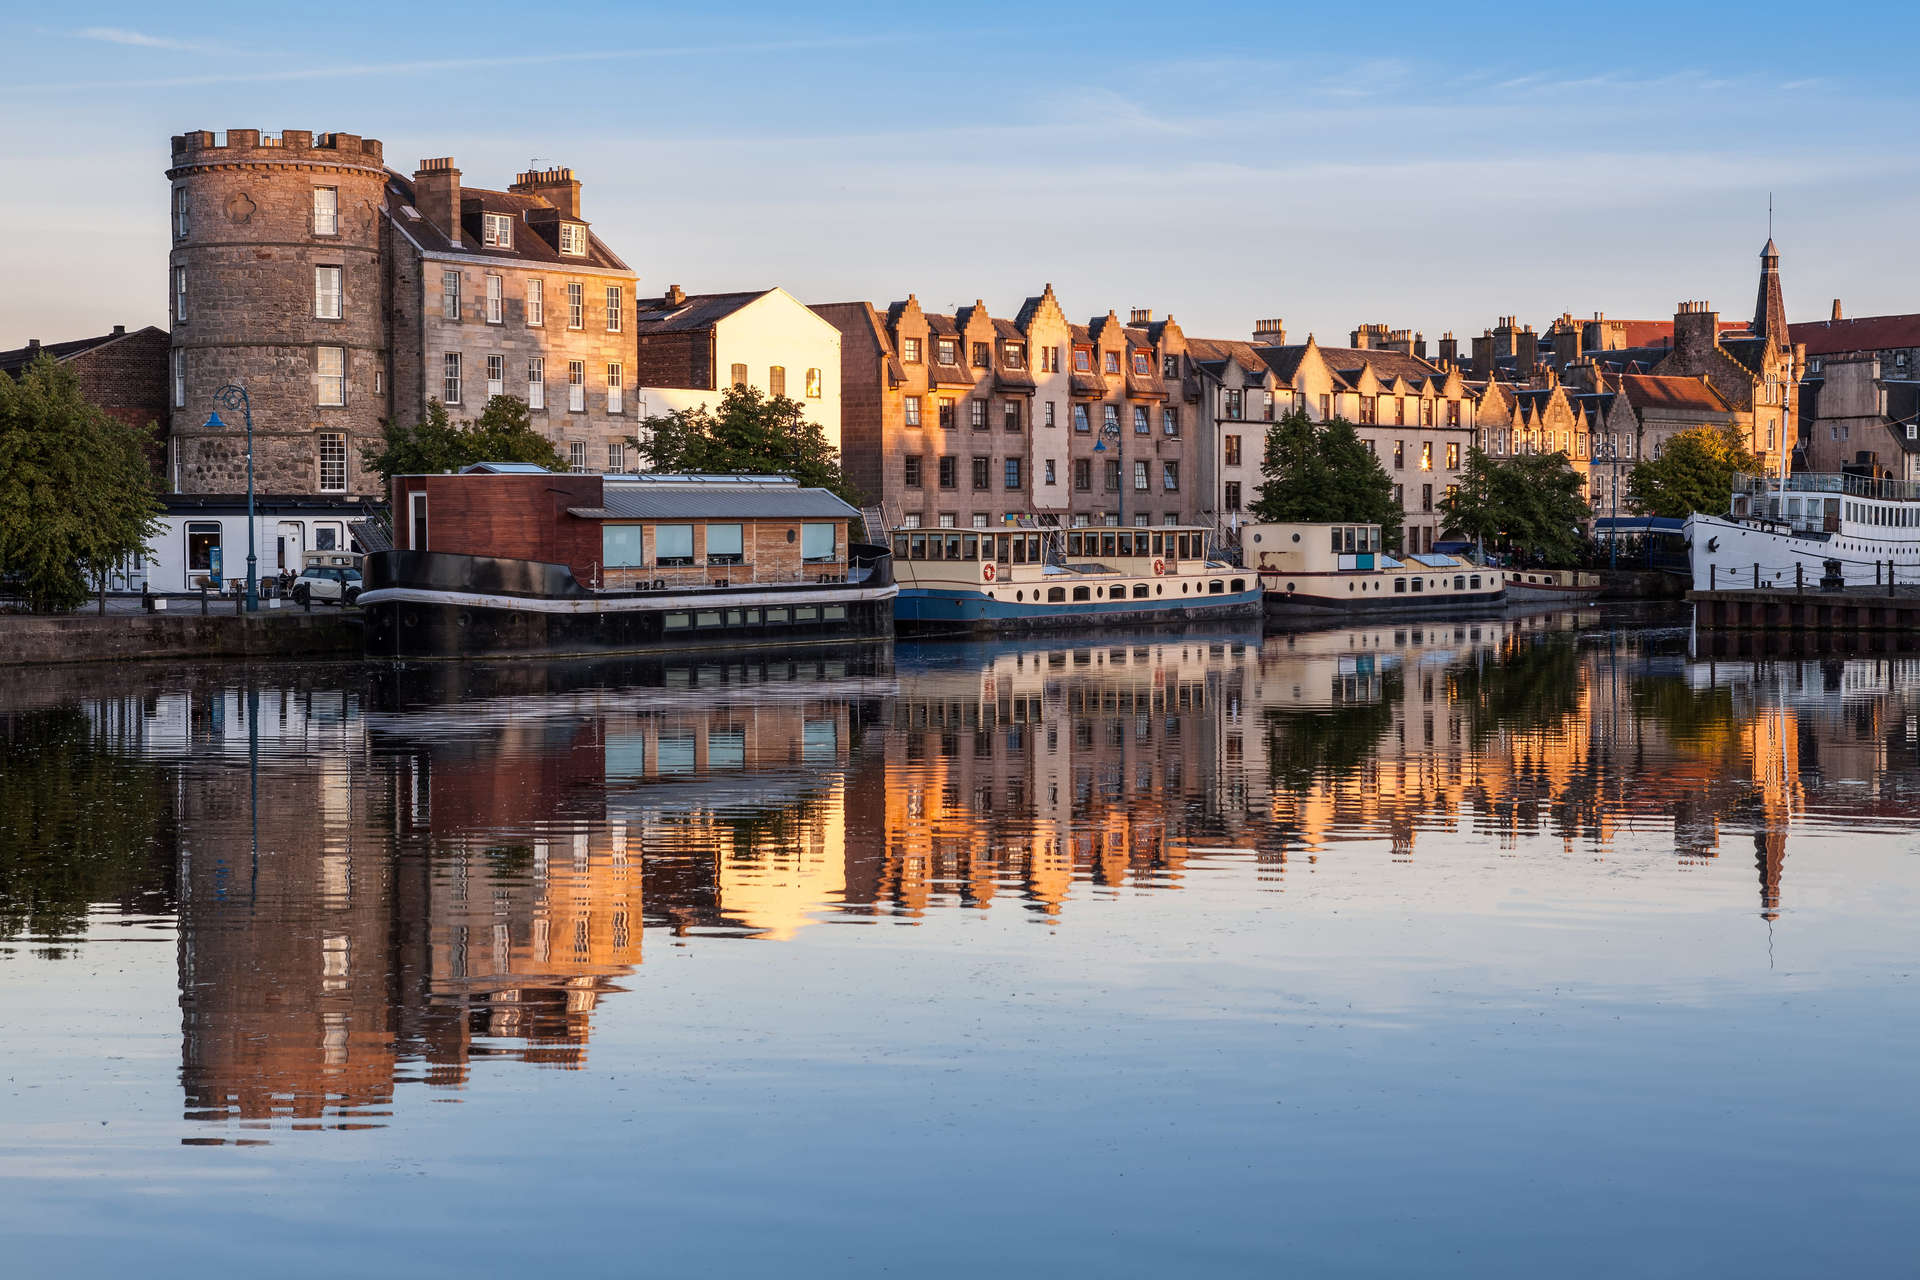 Reflection Of Buildings In River Against Sky In The Shore, Leith, Edinburgh